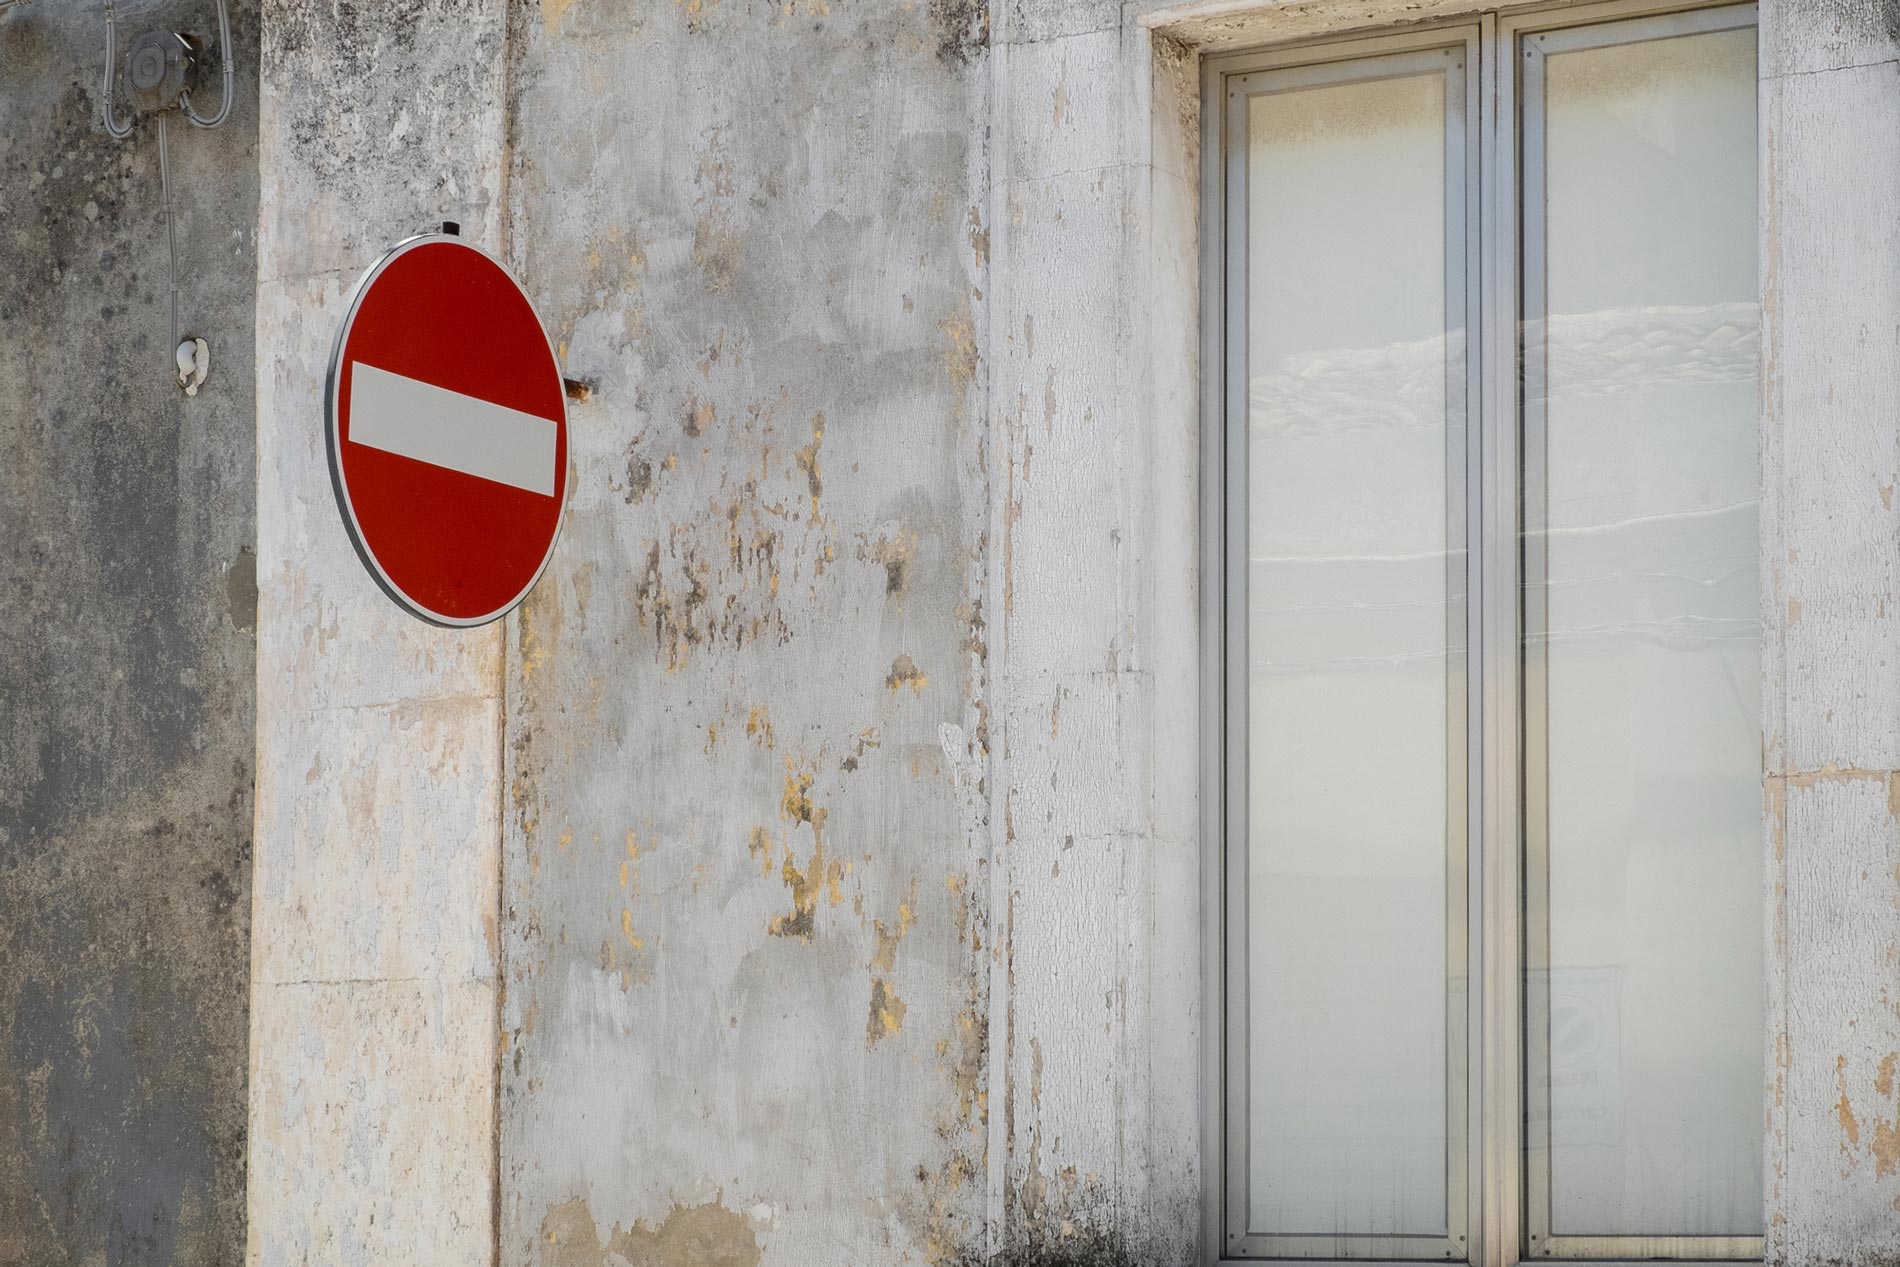 White wall and sign - Floridia, Sicily